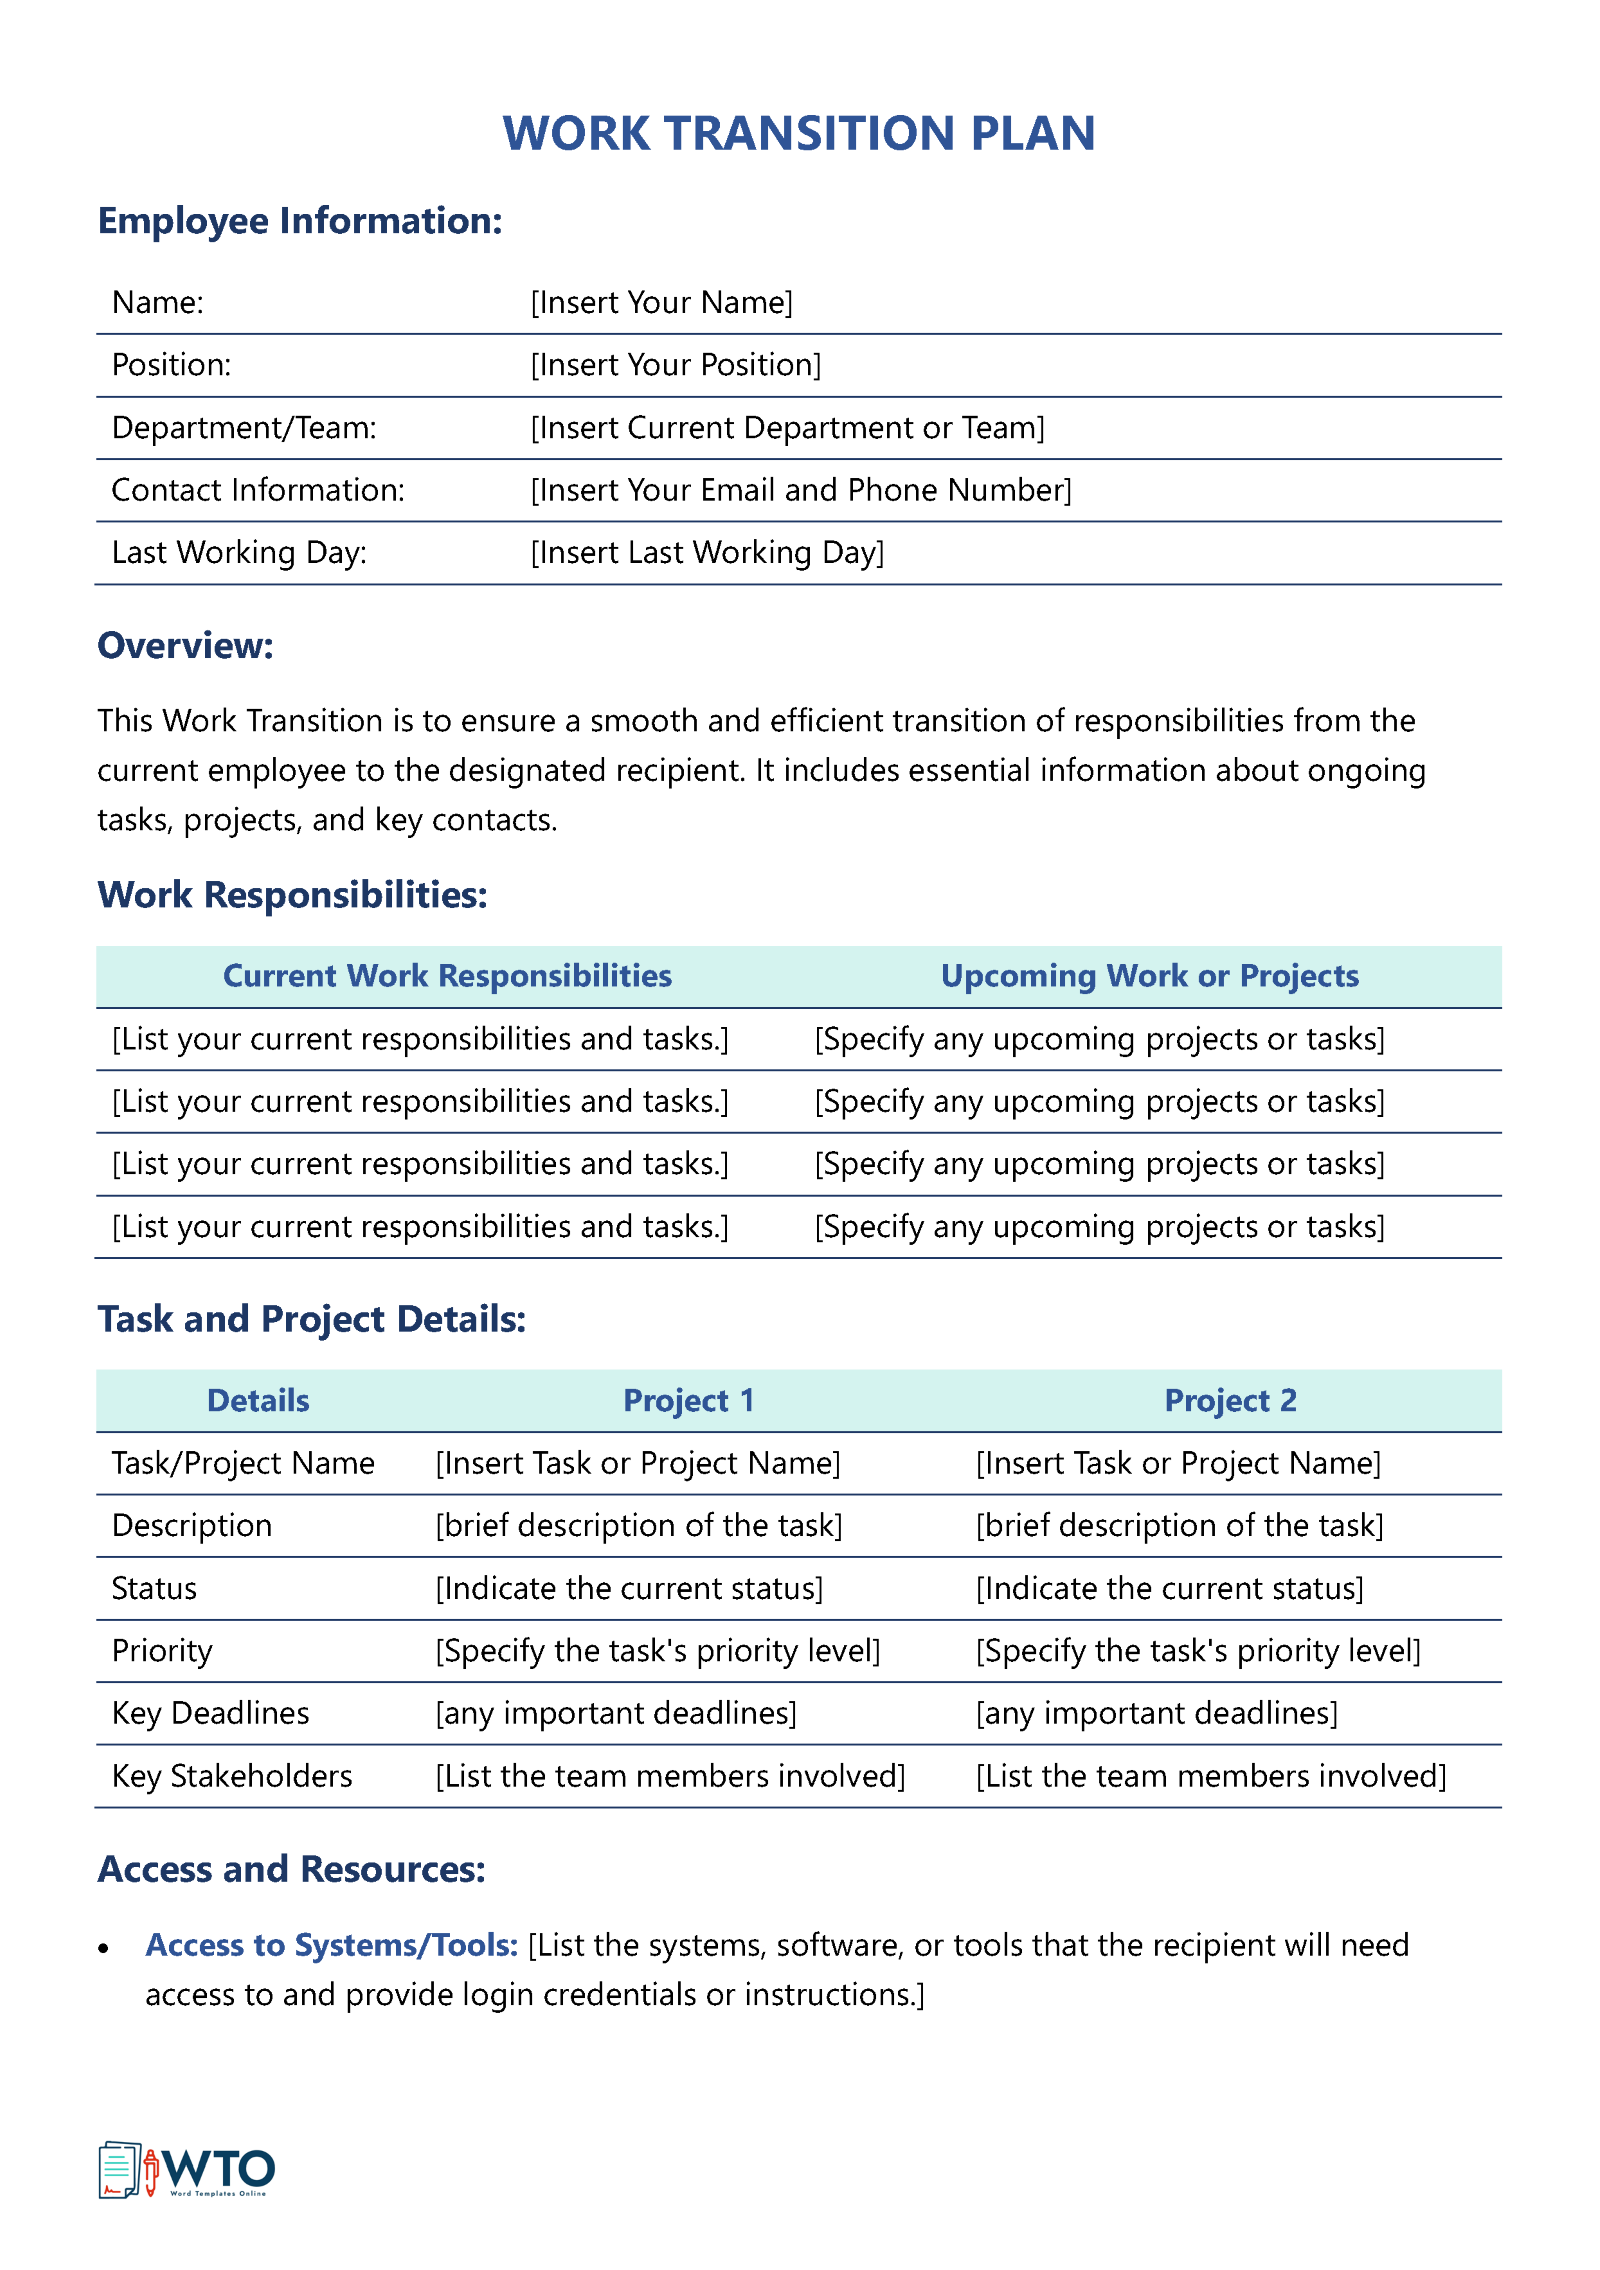 Free Work Transition Plan Template for HR Professionals